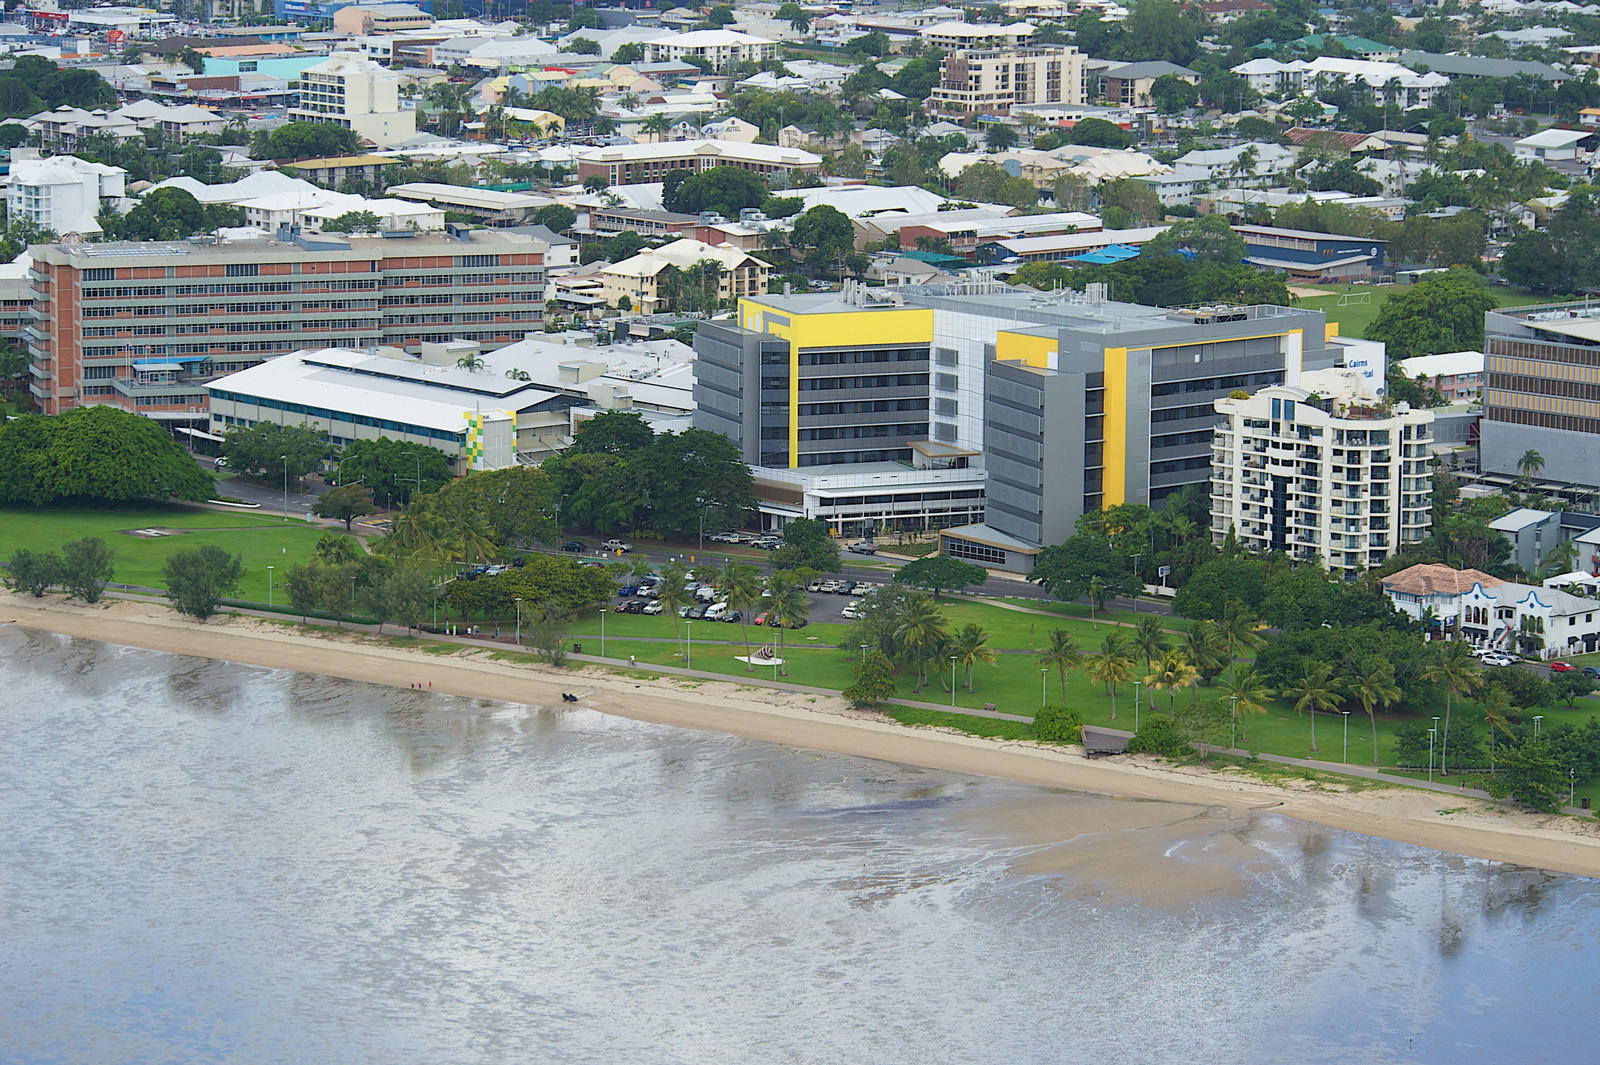 Aerial view of the Cairns Hospital buildings along the Cairns Esplanade